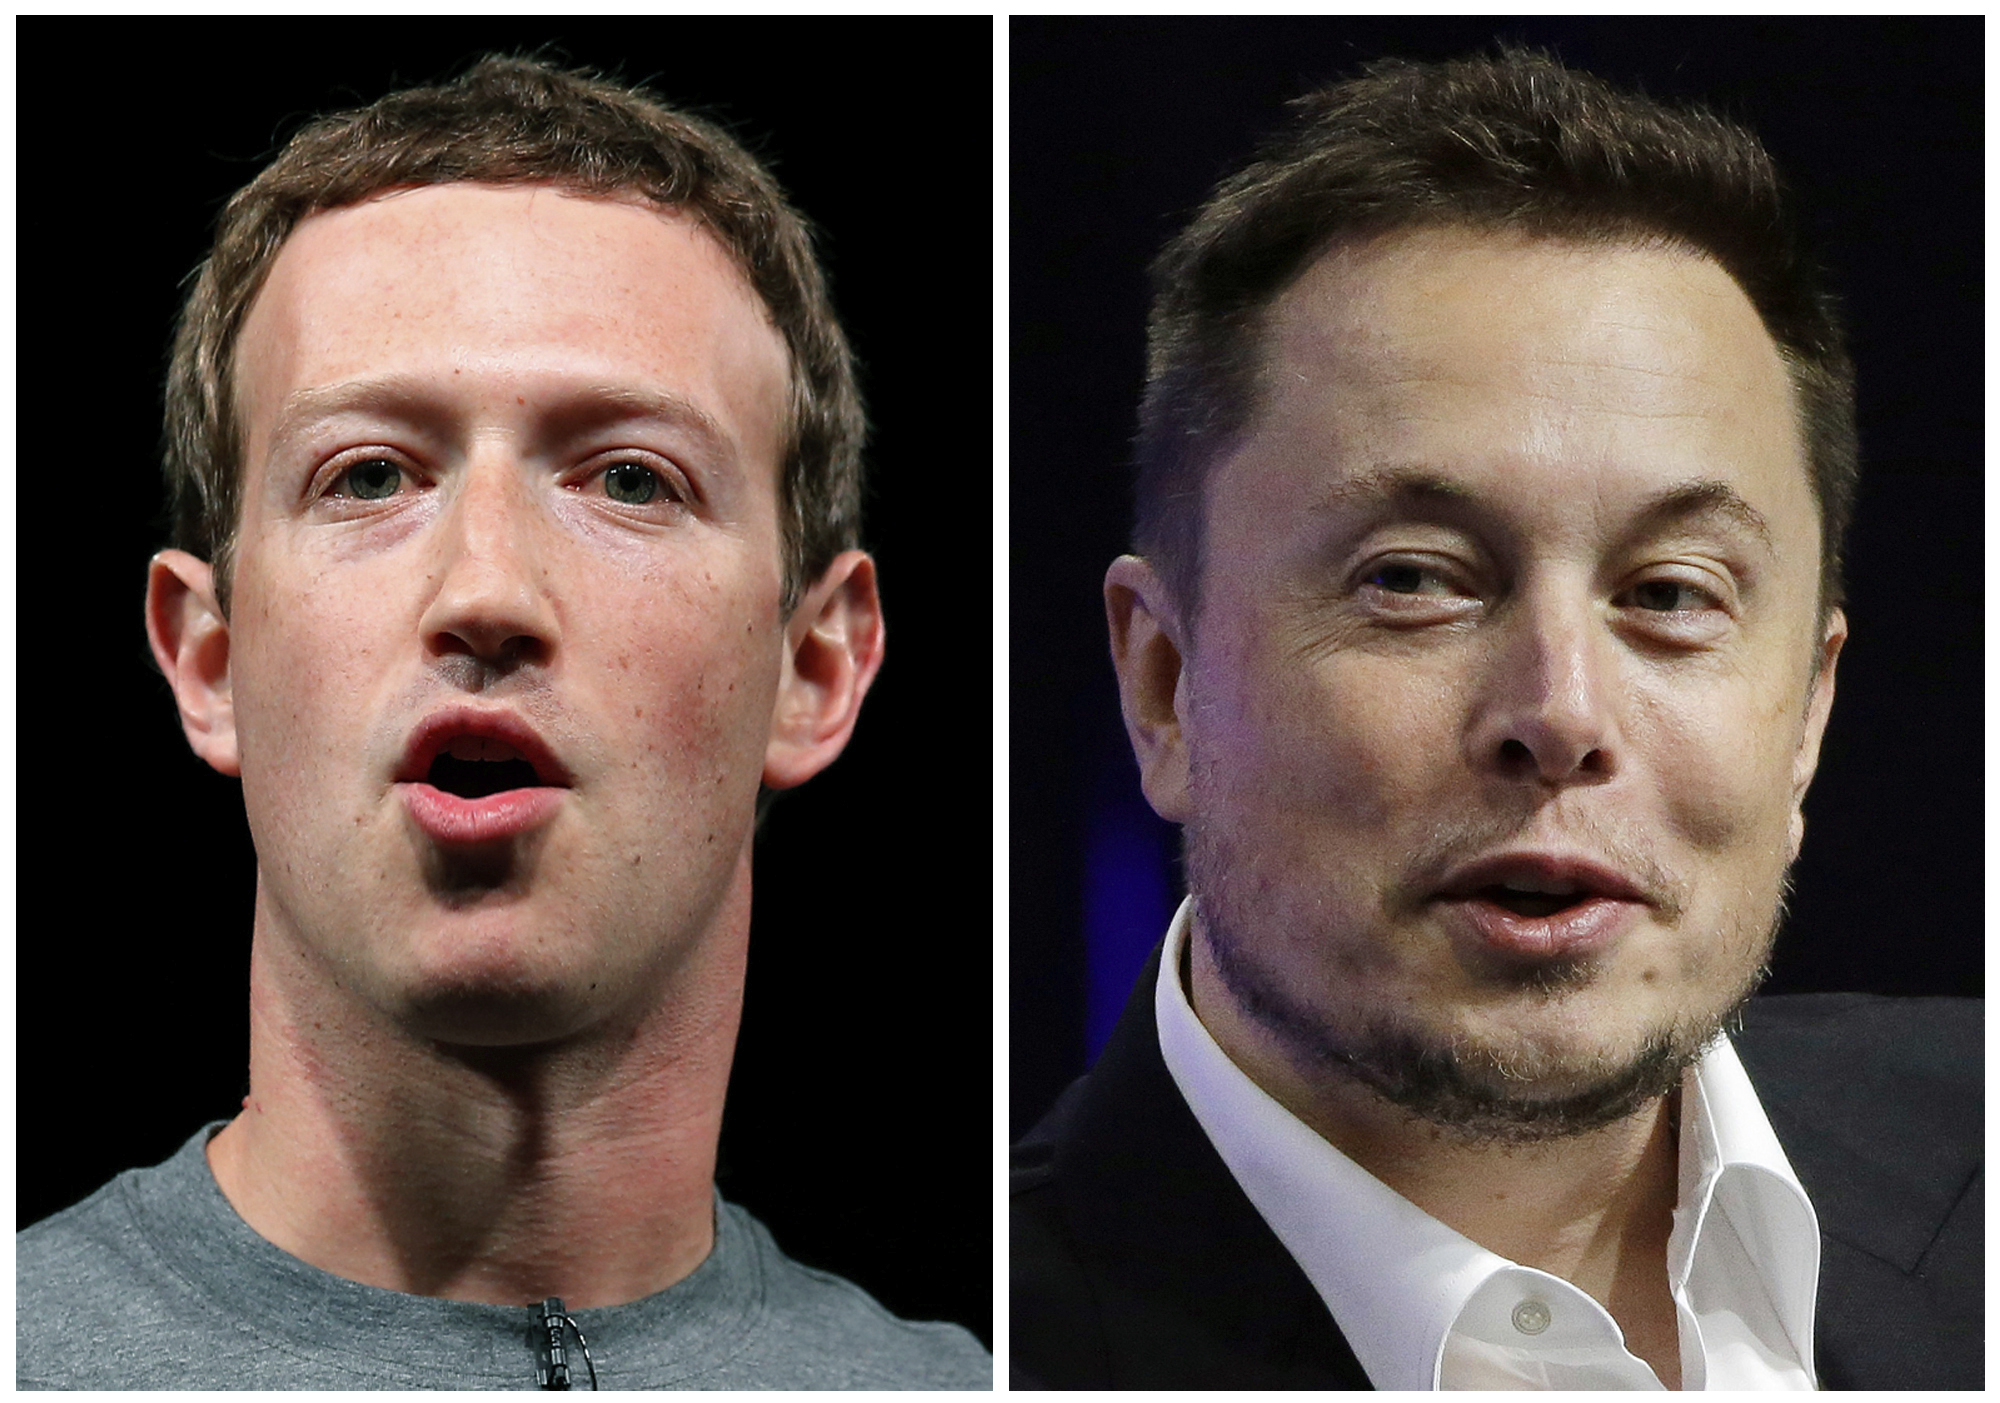 Meta CEO Mark Zuckerberg, left, and Twitter CEO Elon Musk, right, have been toying with the idea of a "cage match" fight, and now Musk says if it happens, it will be livestreamed on his platform.